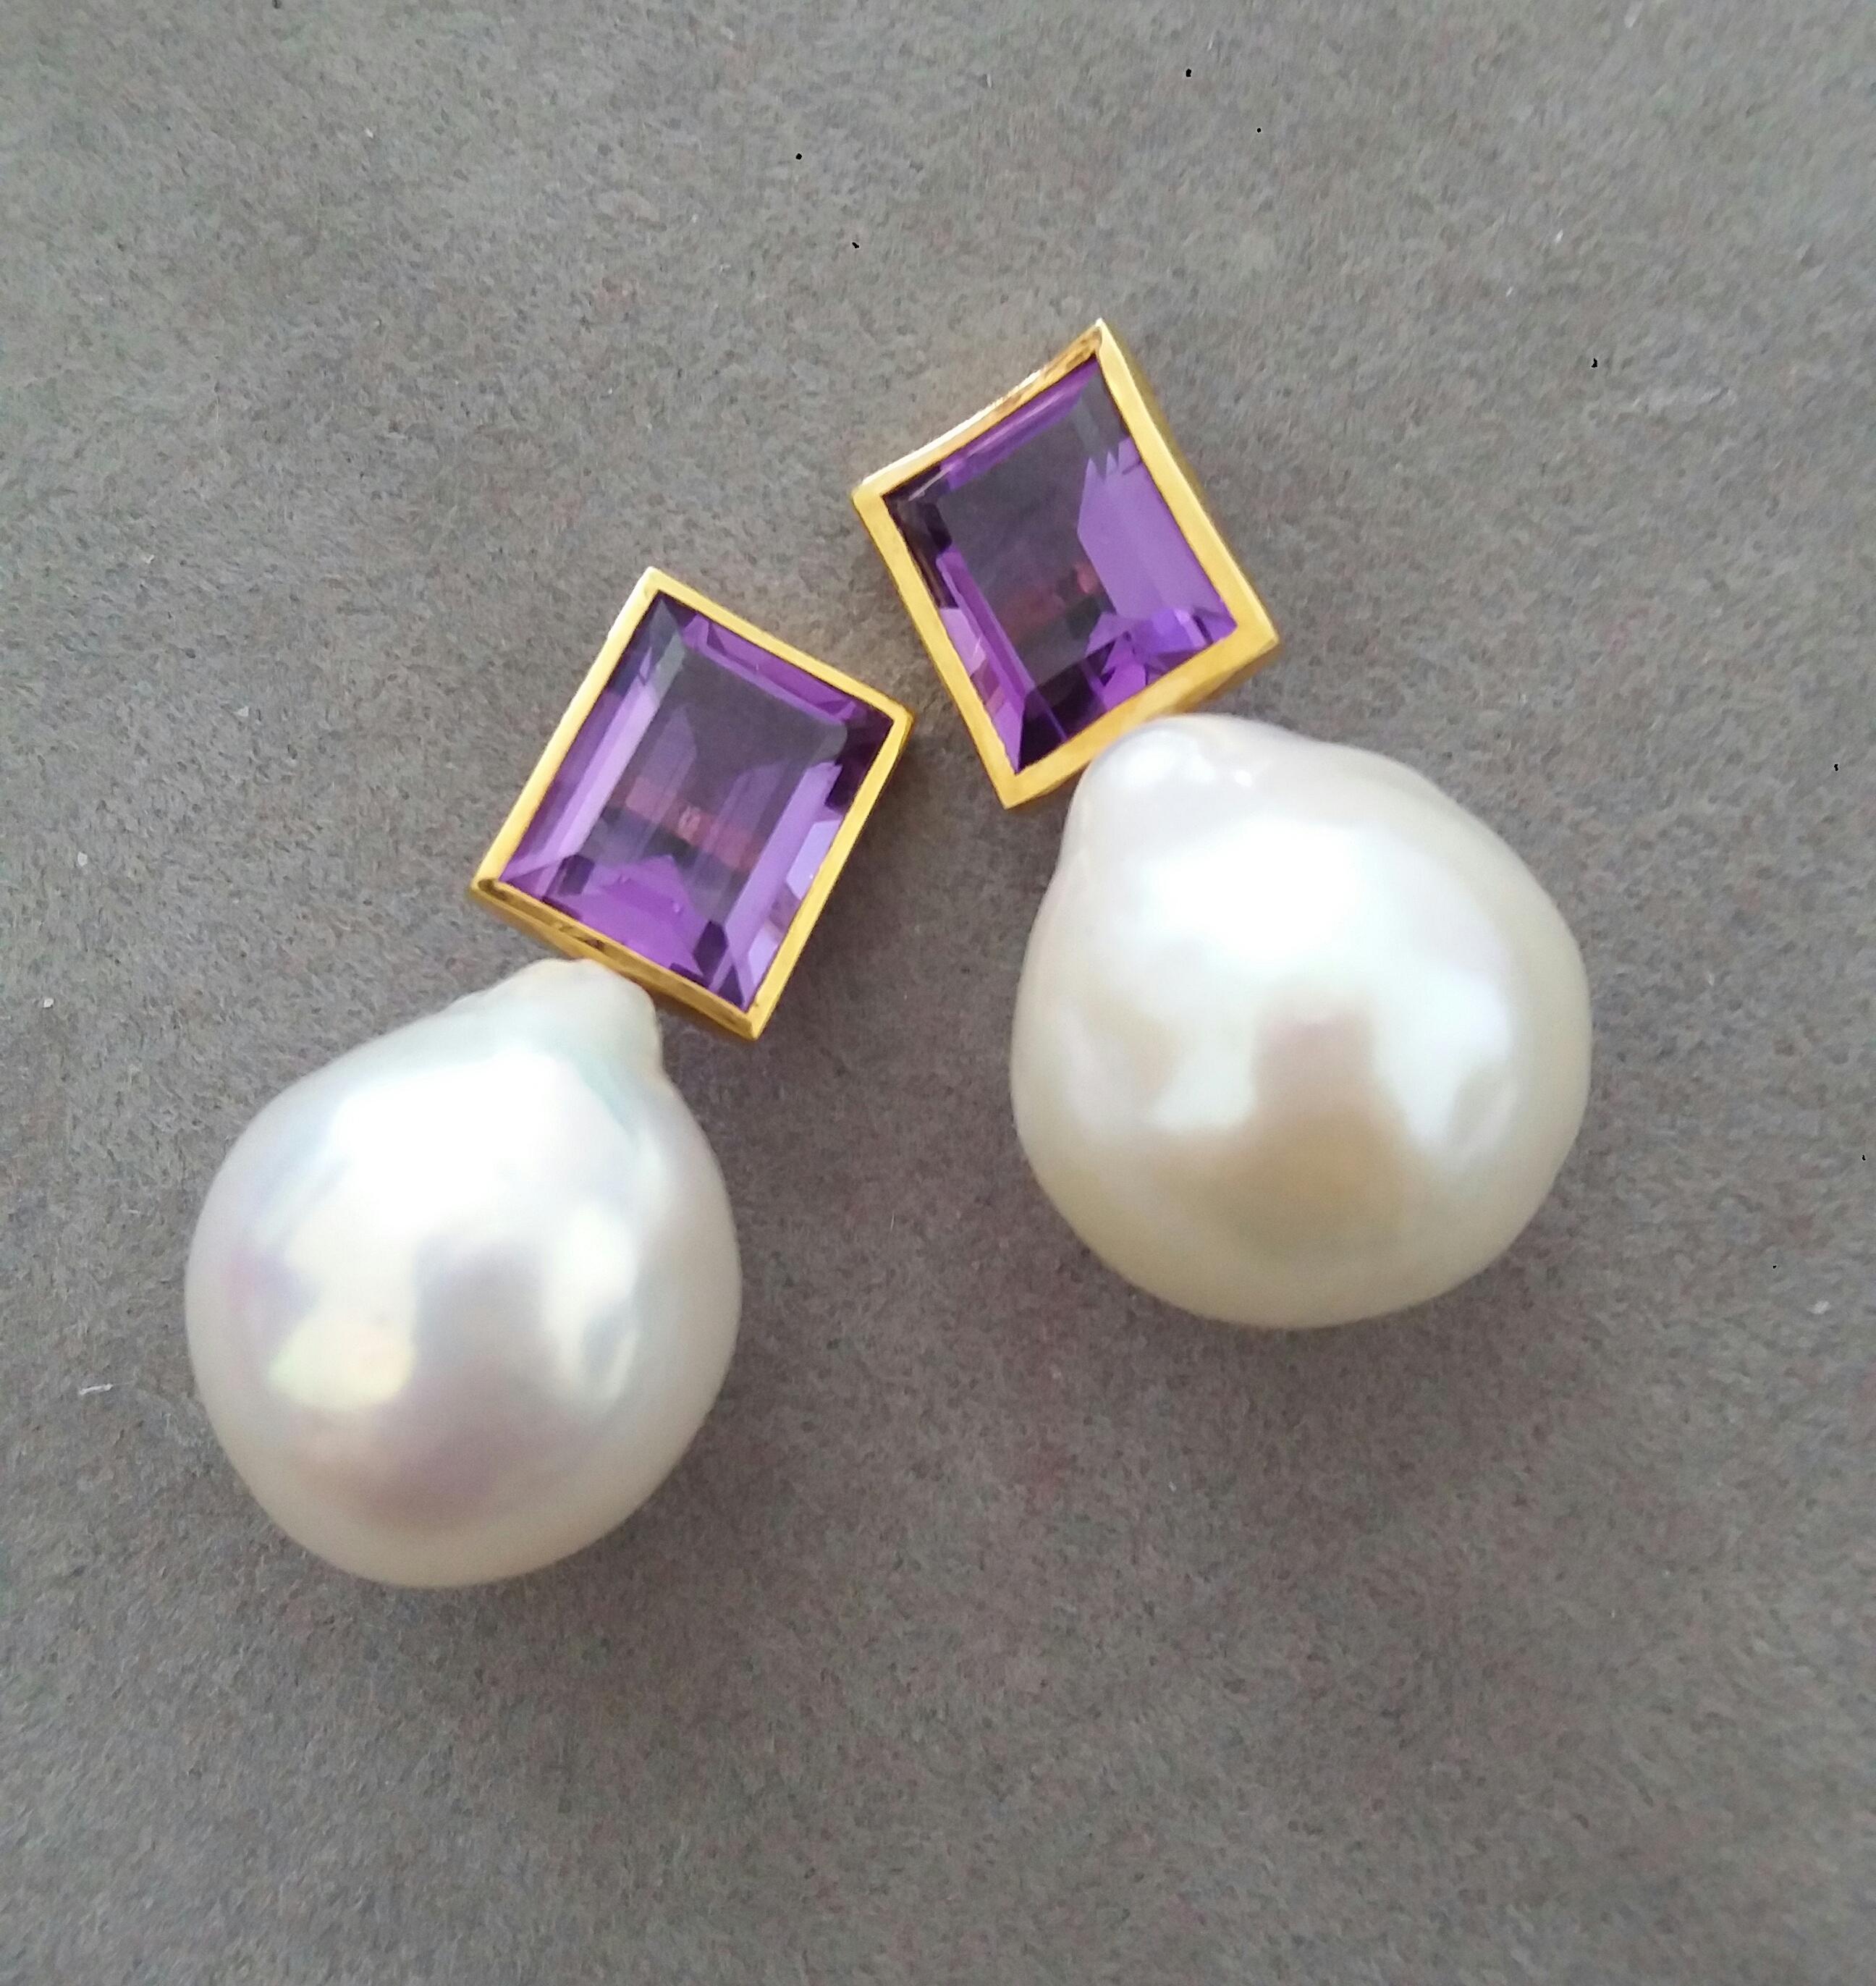 These simple but elegant Handmade Earrings have 2 faceted rectangular and perfectly clean Natural Amethysts measuring 9x11 mm and weighing 6 carats set in yellow gold bezel at the top to which are suspended 2  unusual Big Size White Baroque Pearls